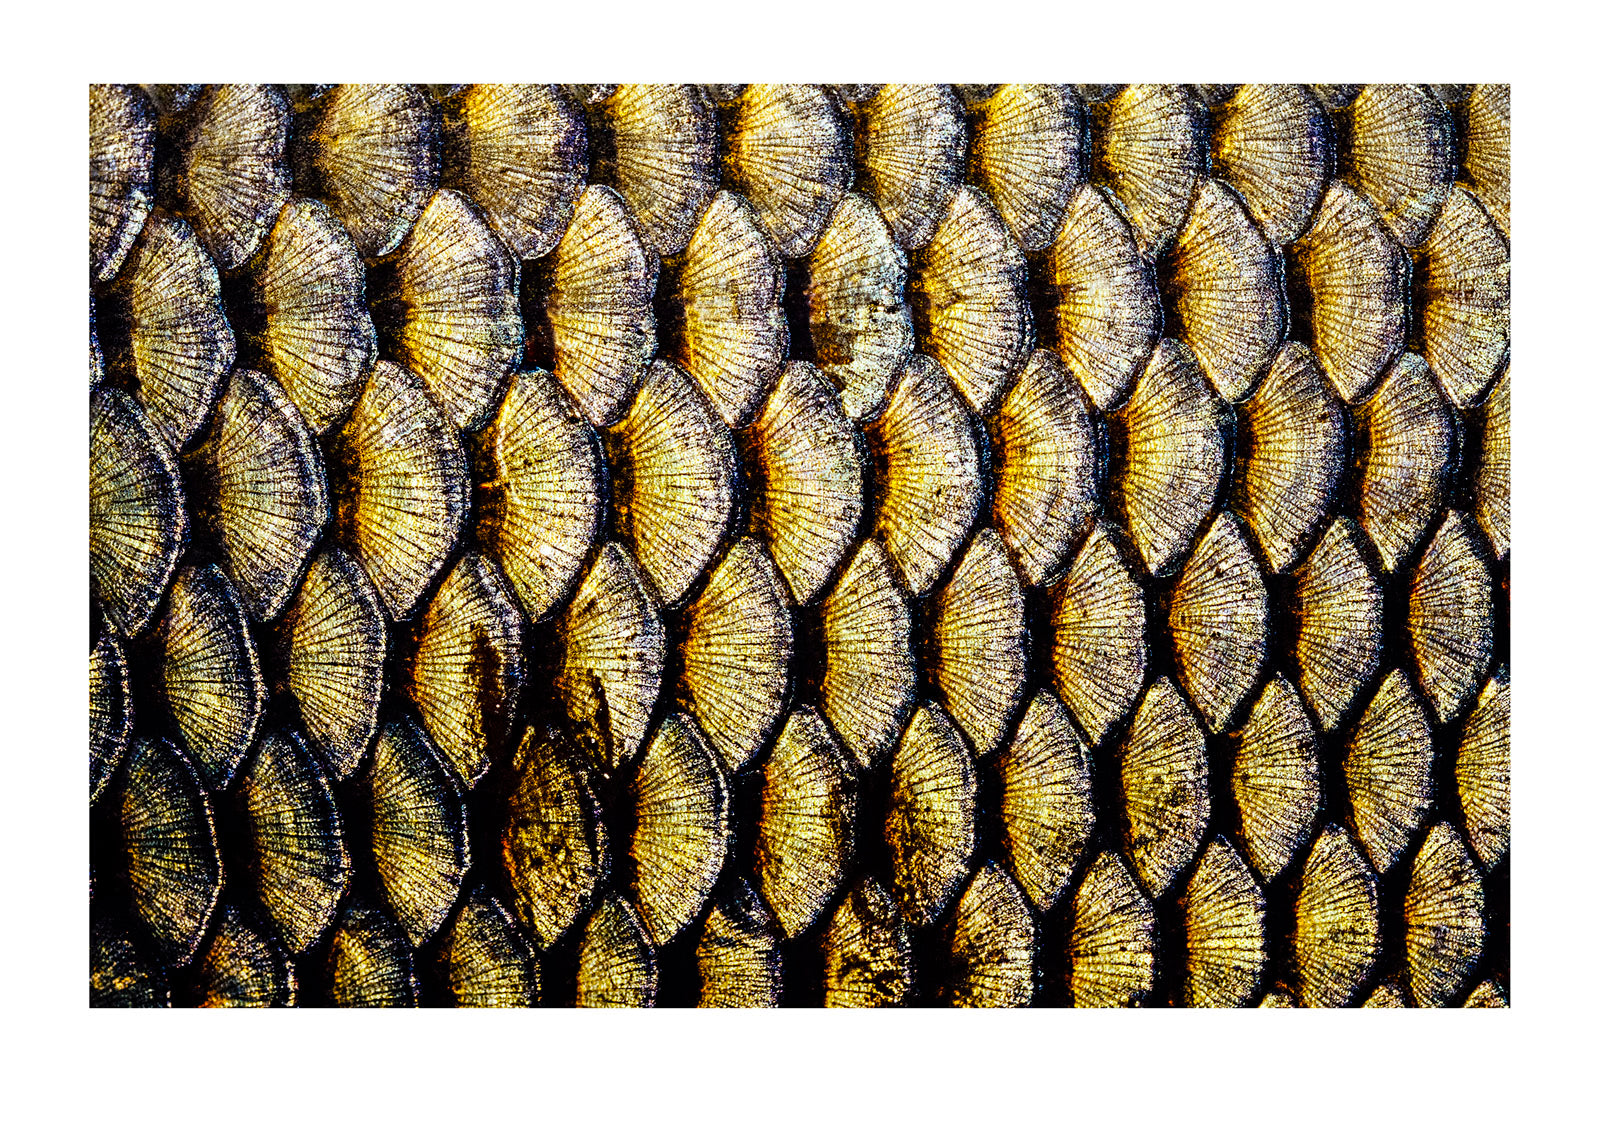 The intricate patterns of an introduced freshwater Carp's scales. Mundiwa Station, New South Wales, Australia.